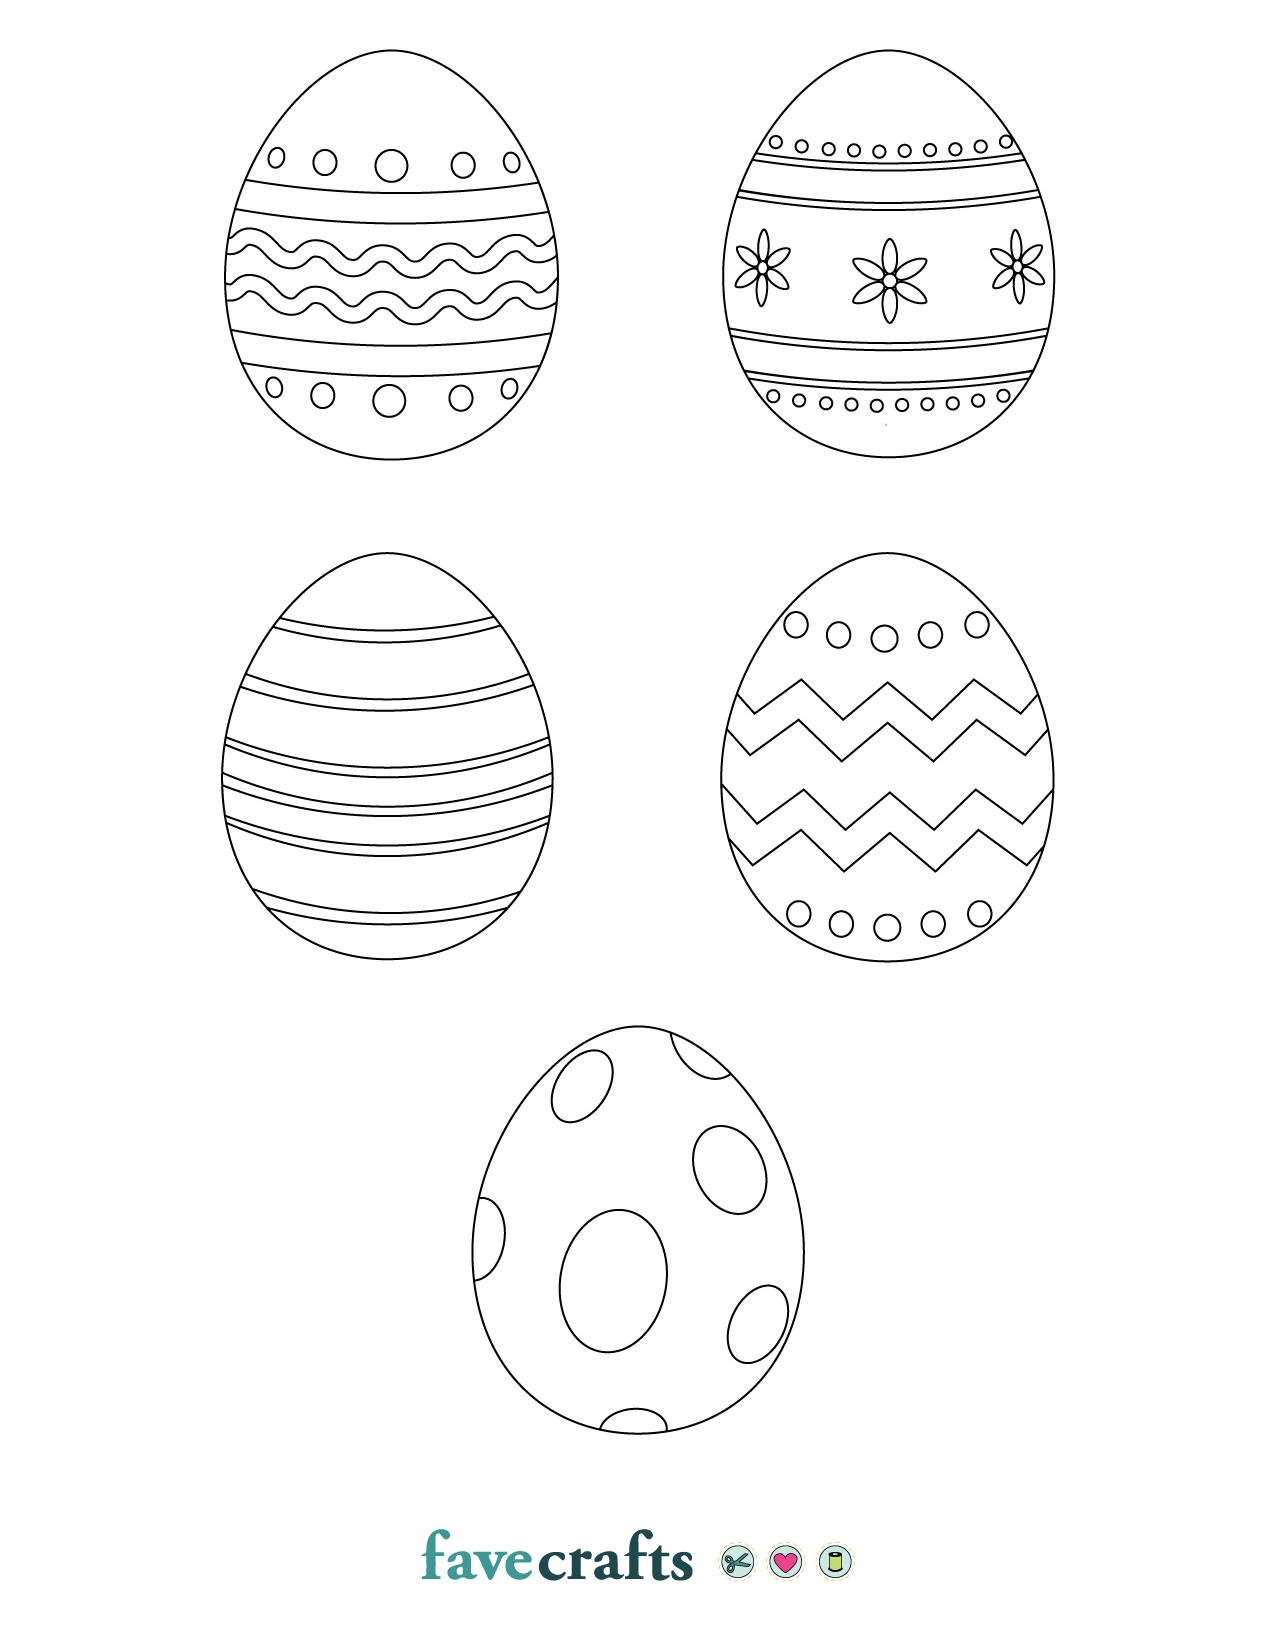 printable-easter-eggs-free-download-favecrafts